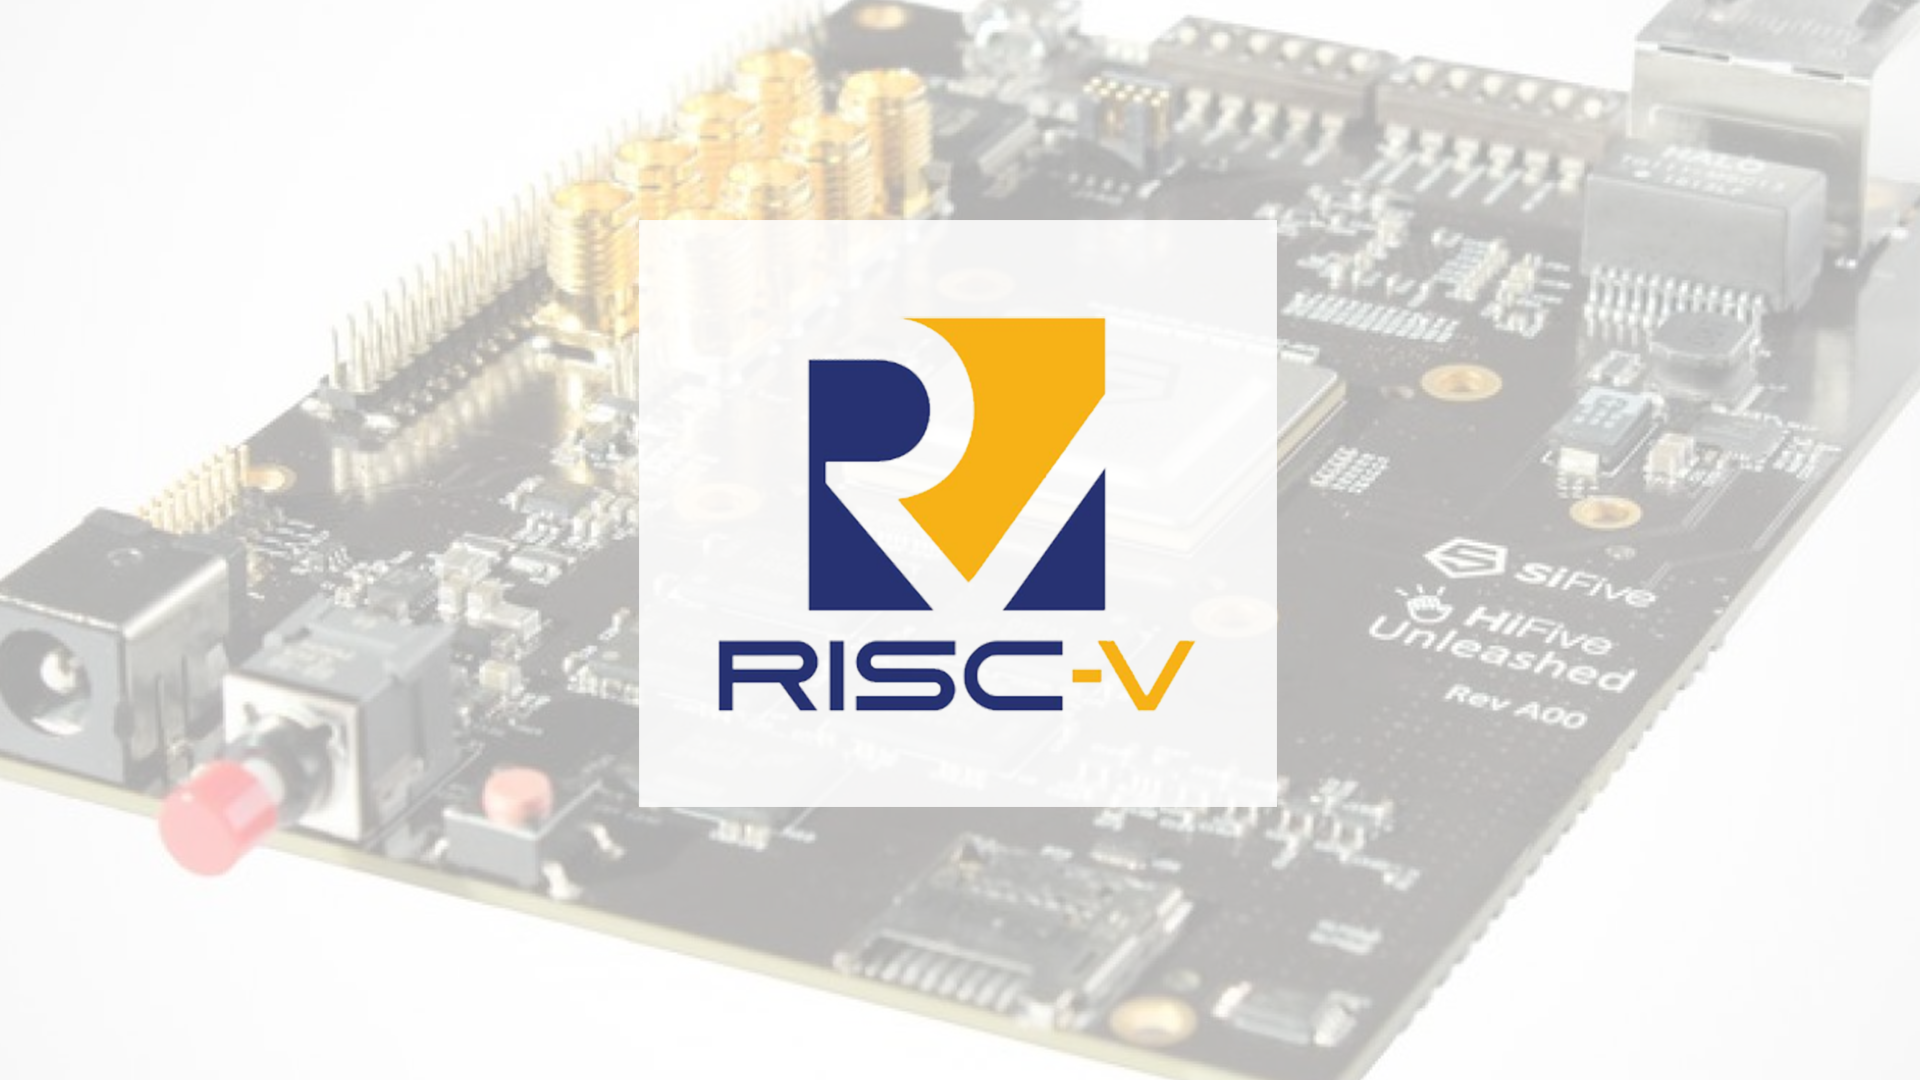 Tech Snippet #11: So, What Exactly is RISV V? | TechReportArticles